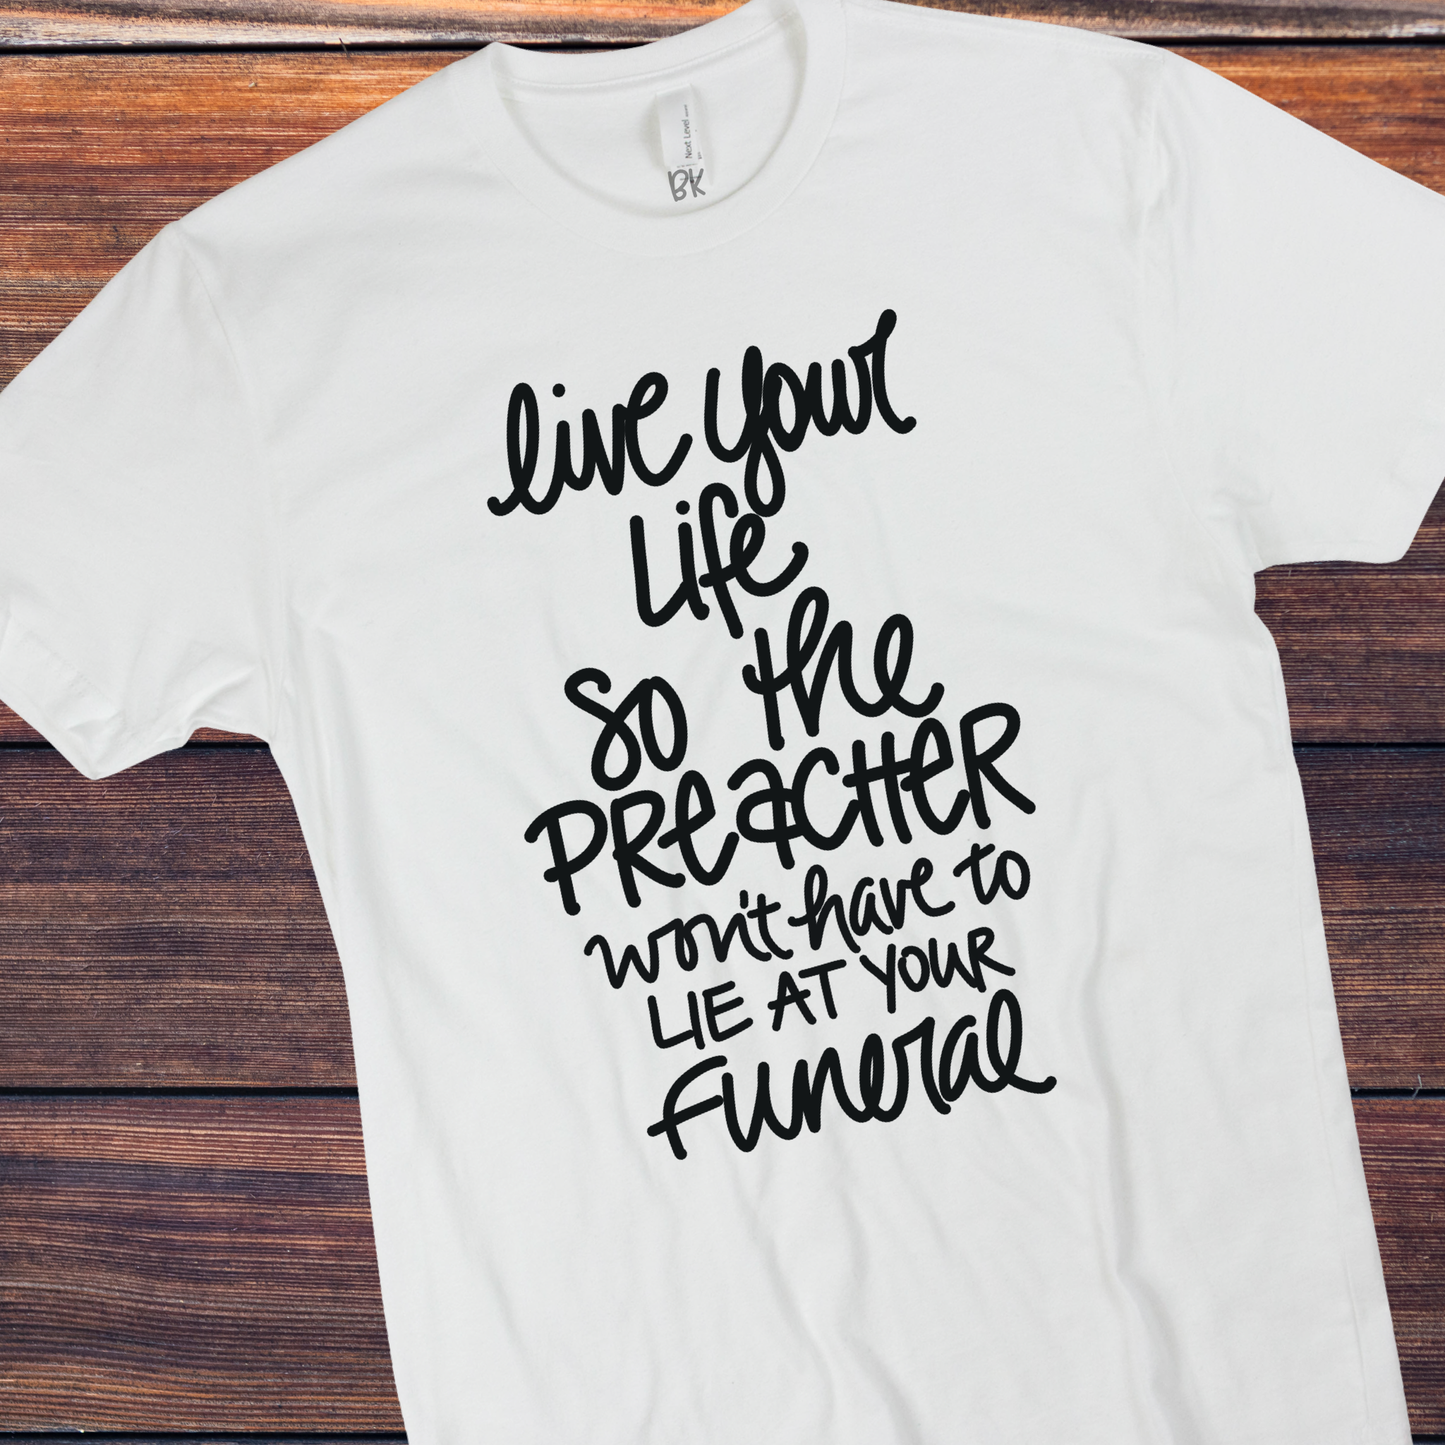 DTF TRANSFER Live your life so the preacher won’t have to lie at your funeral